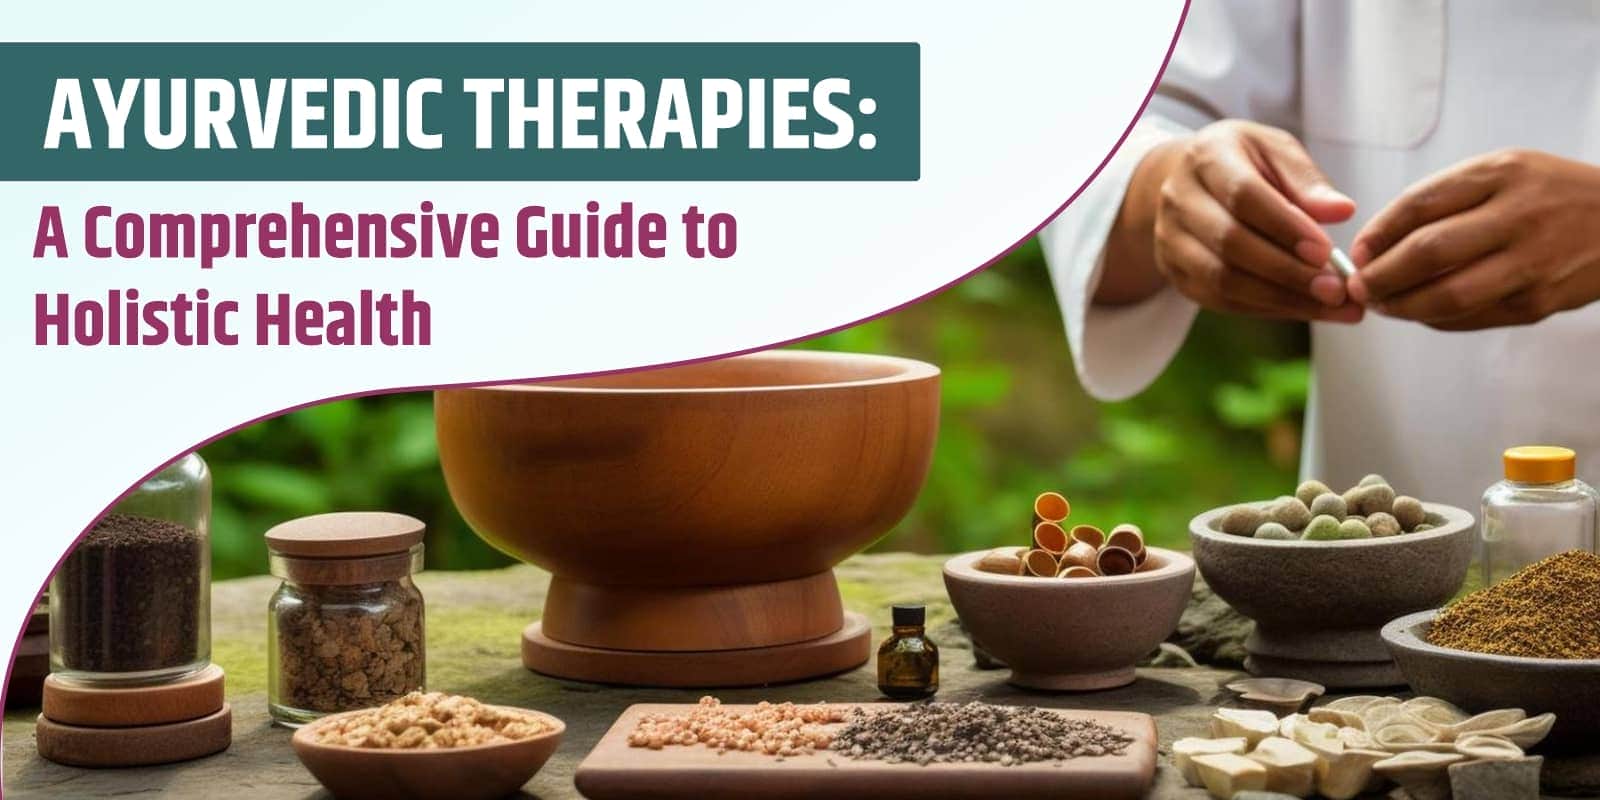 Ayurvedic Therapies: A Comprehensive Guide to Holistic Health